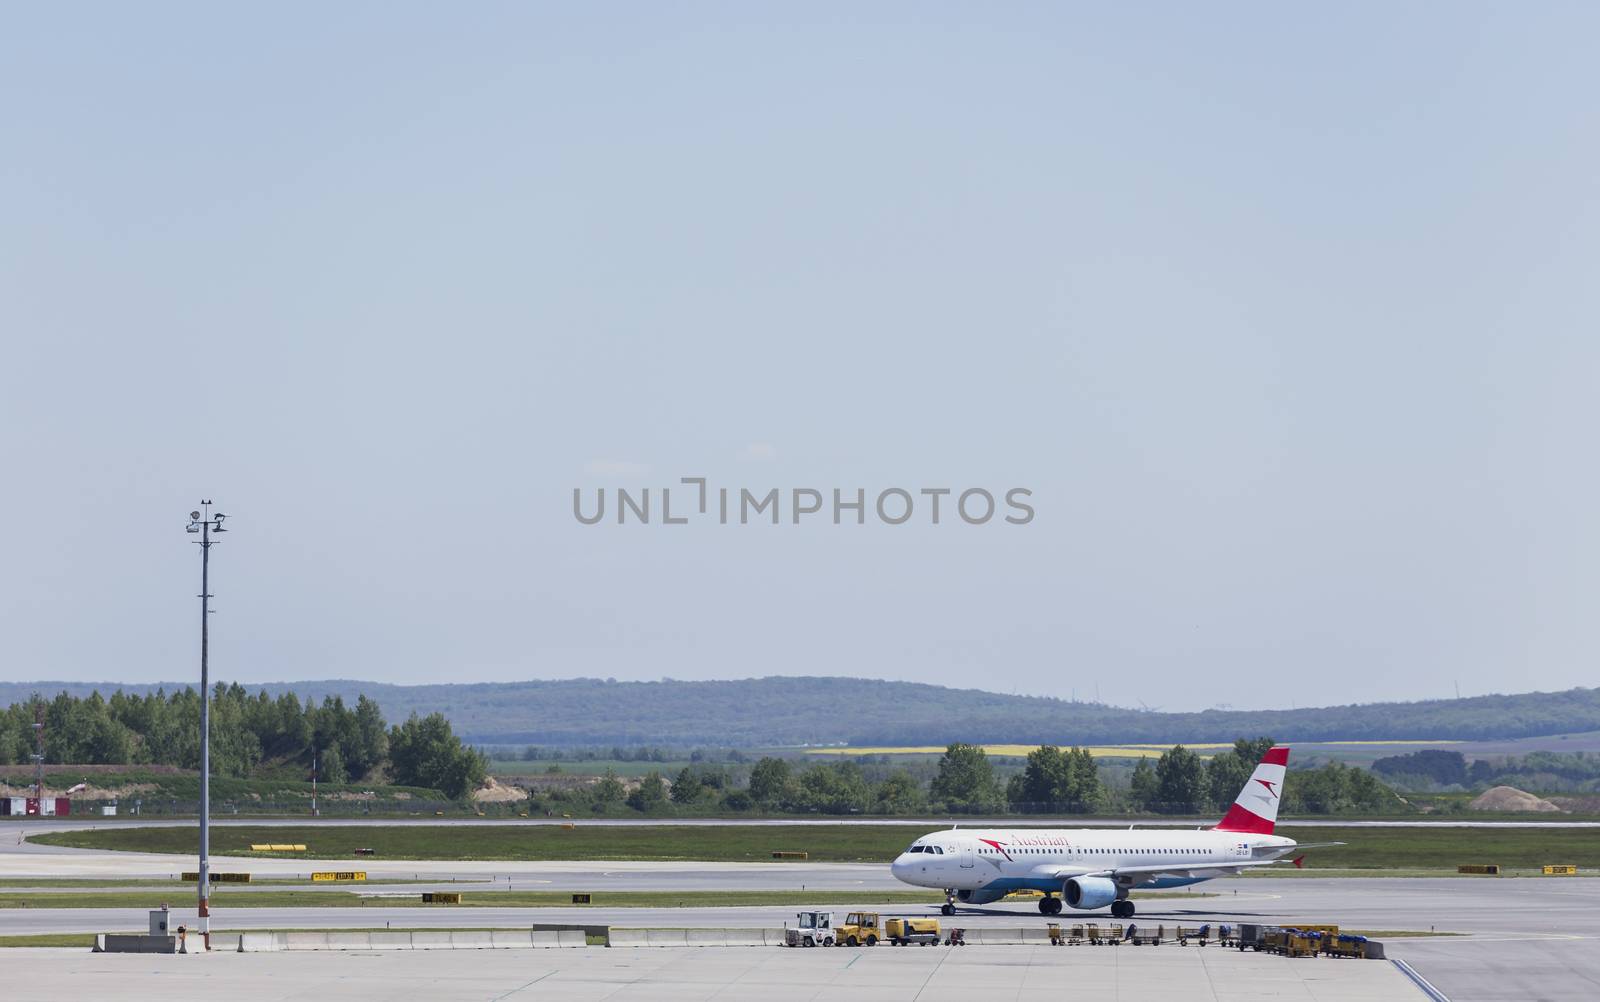 VIENNA, AUSTRIA – APRIL 30th 2016: Plane moving to take off area at Vienna International Airport on a busy Saturday.